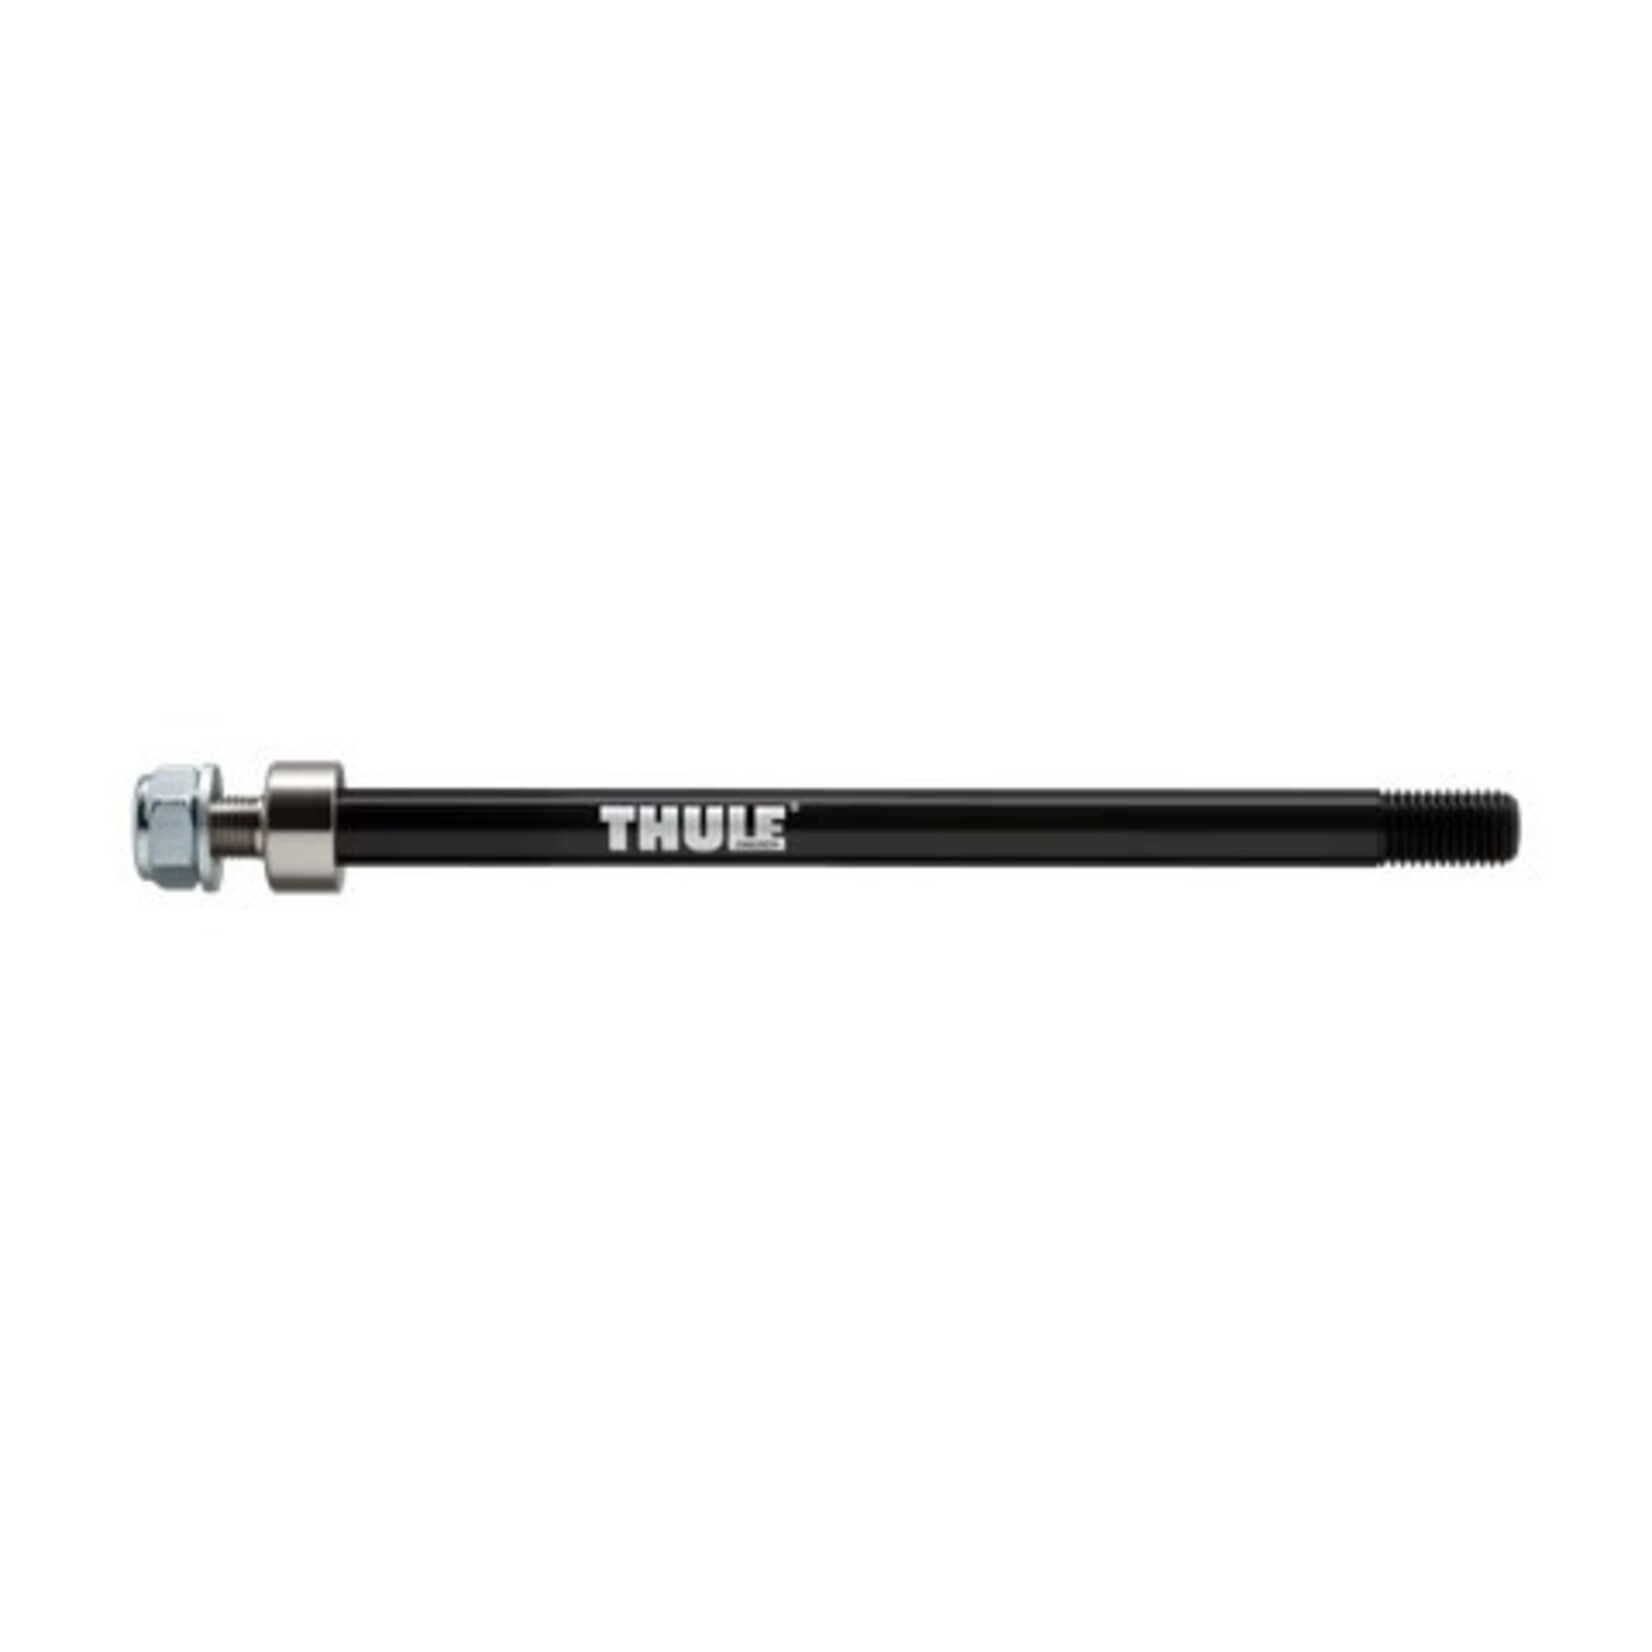 Thule Thule Adapter 169-184mm Syntace (M12x1.0) Black